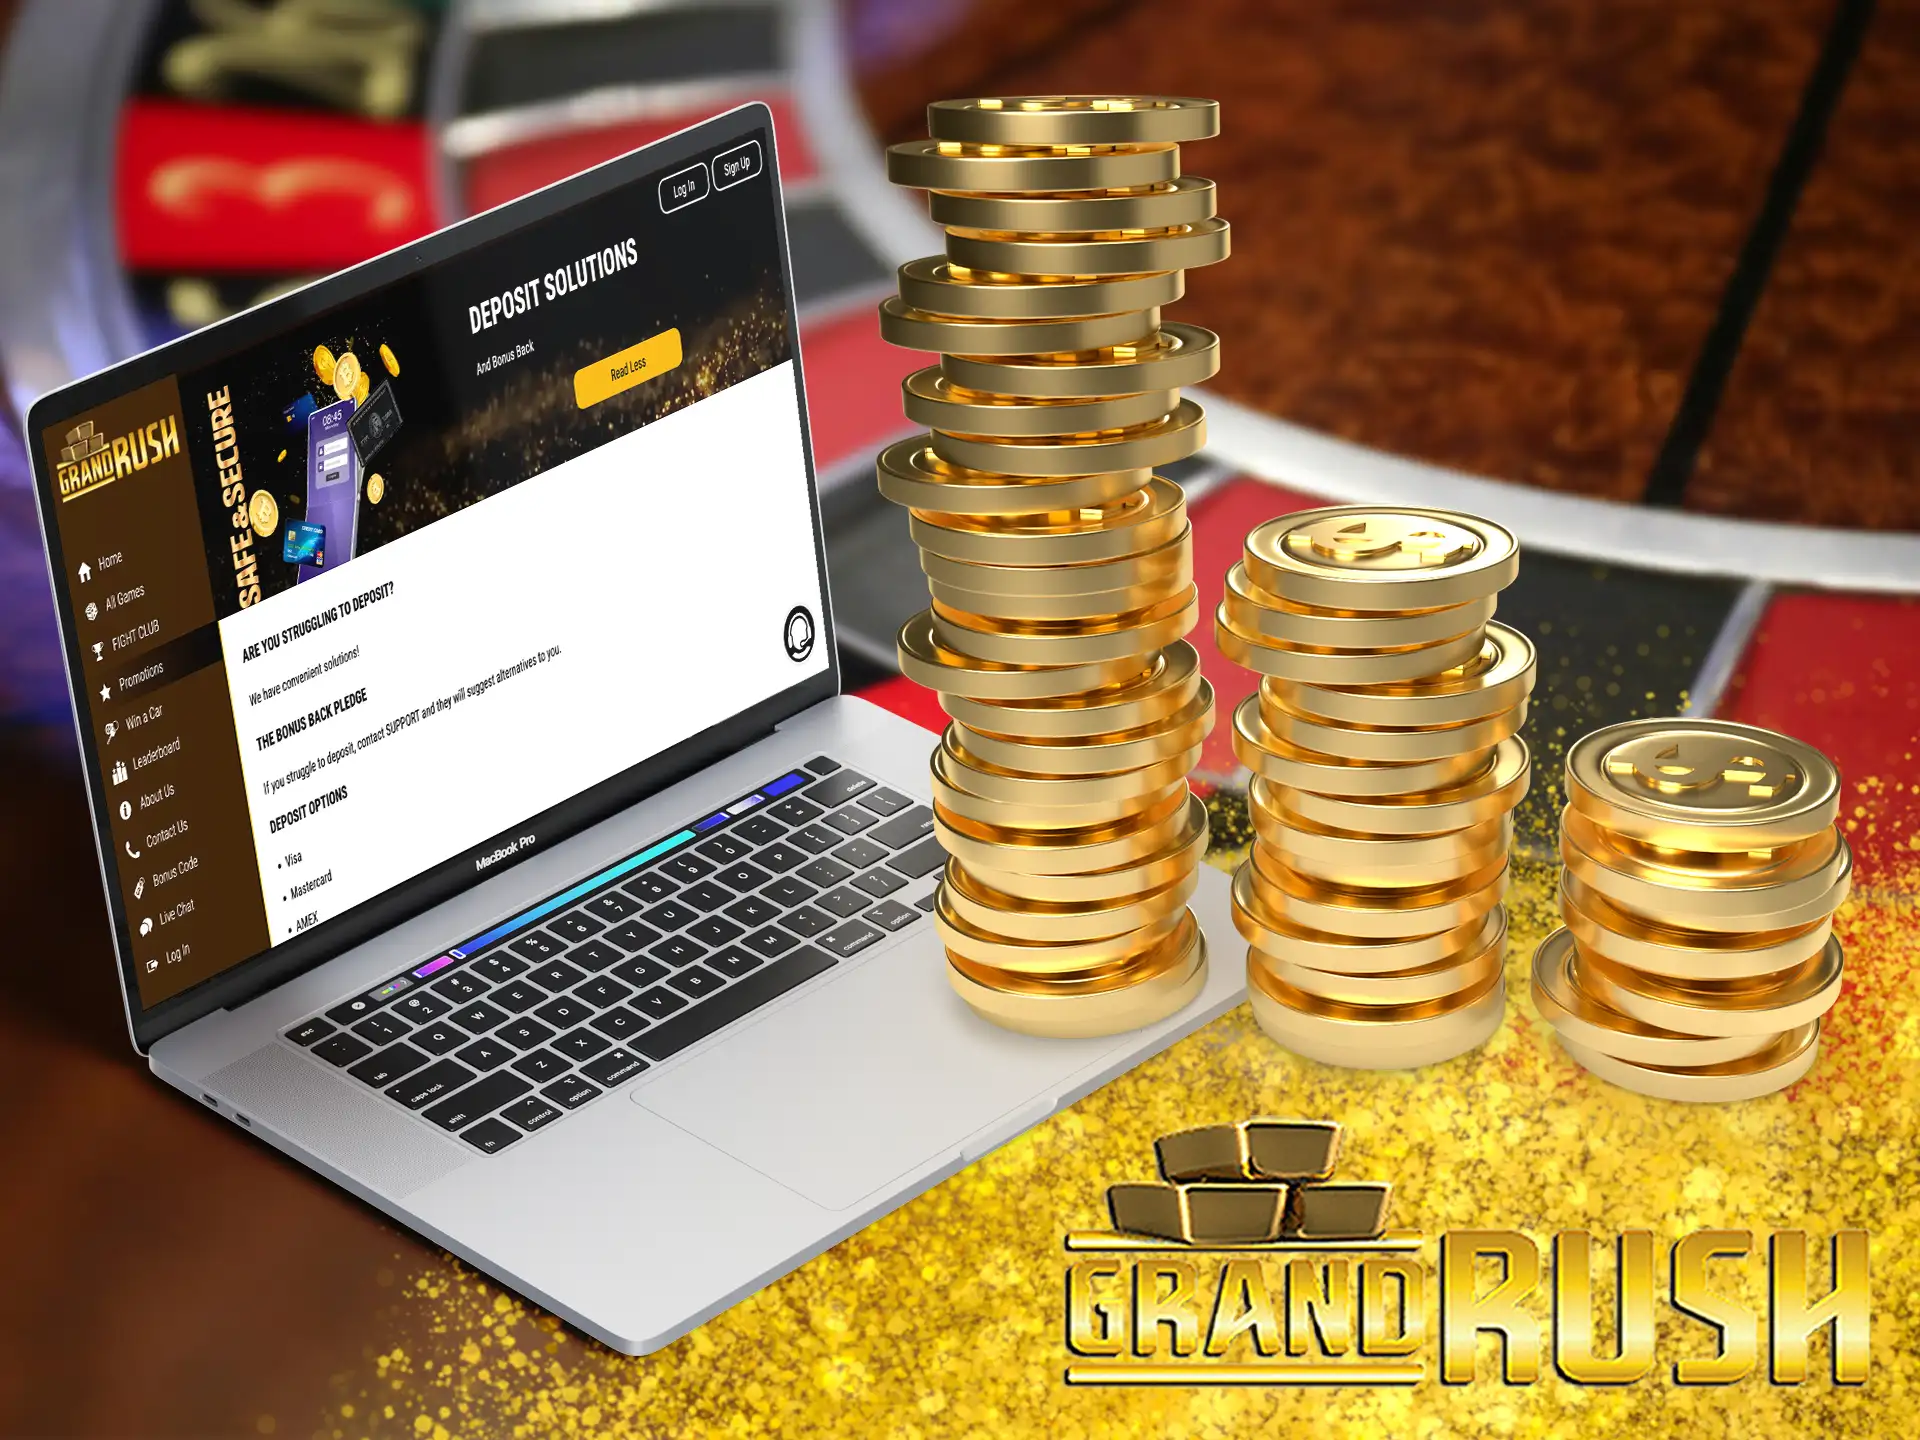 Use promo code 99QUEENS and get up to 1,500 AUD and 99 Grand Rush casino free chips.